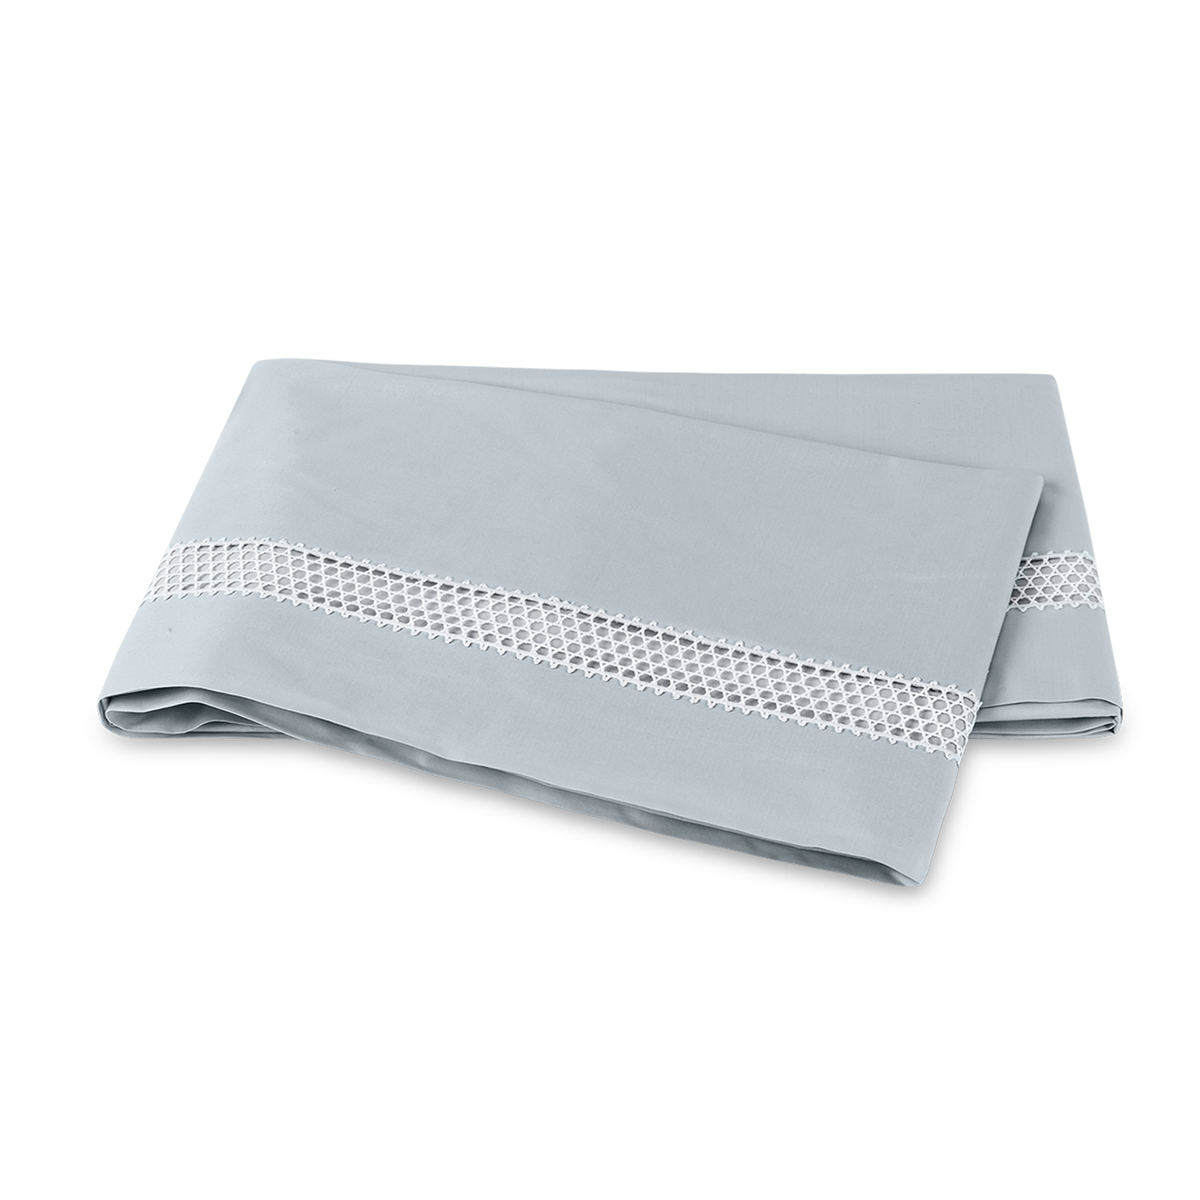 Clear Image of Matouk Cecily Flat Sheet in Pool Color